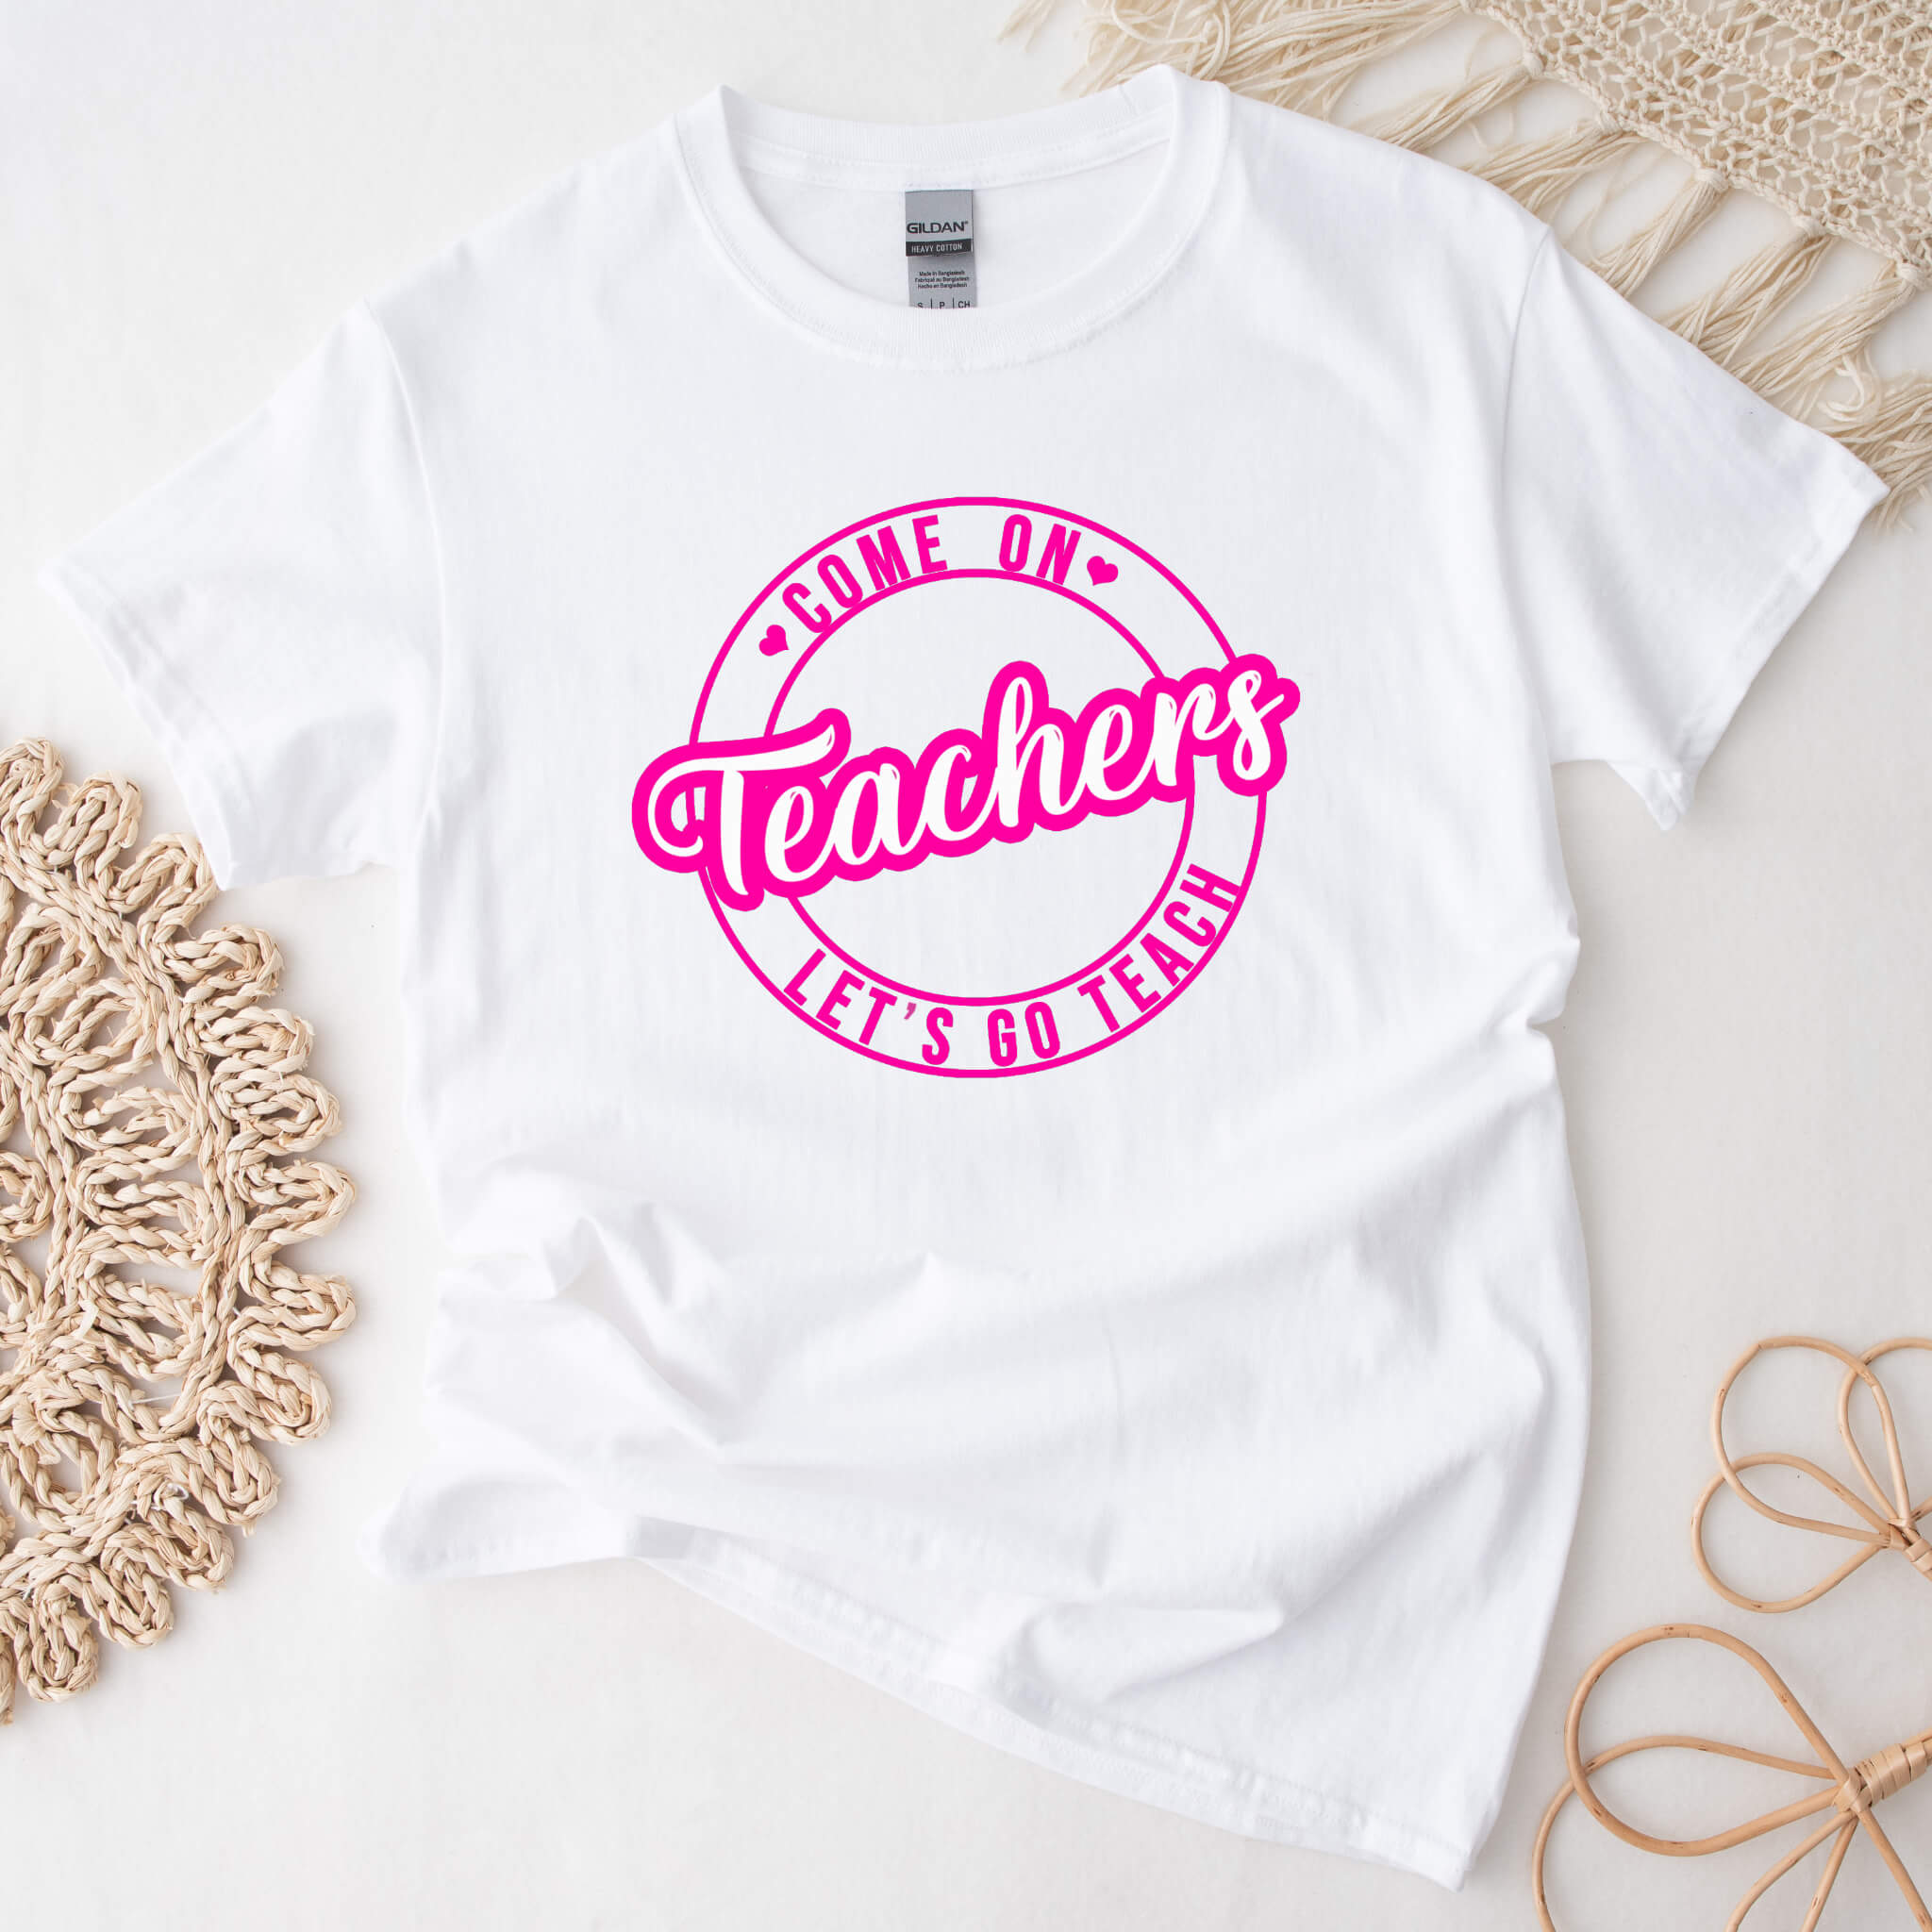 First Day of School Barbie Themed Come on Teachers Let’s Go Teach Women’s Graphic Print T-Shirt